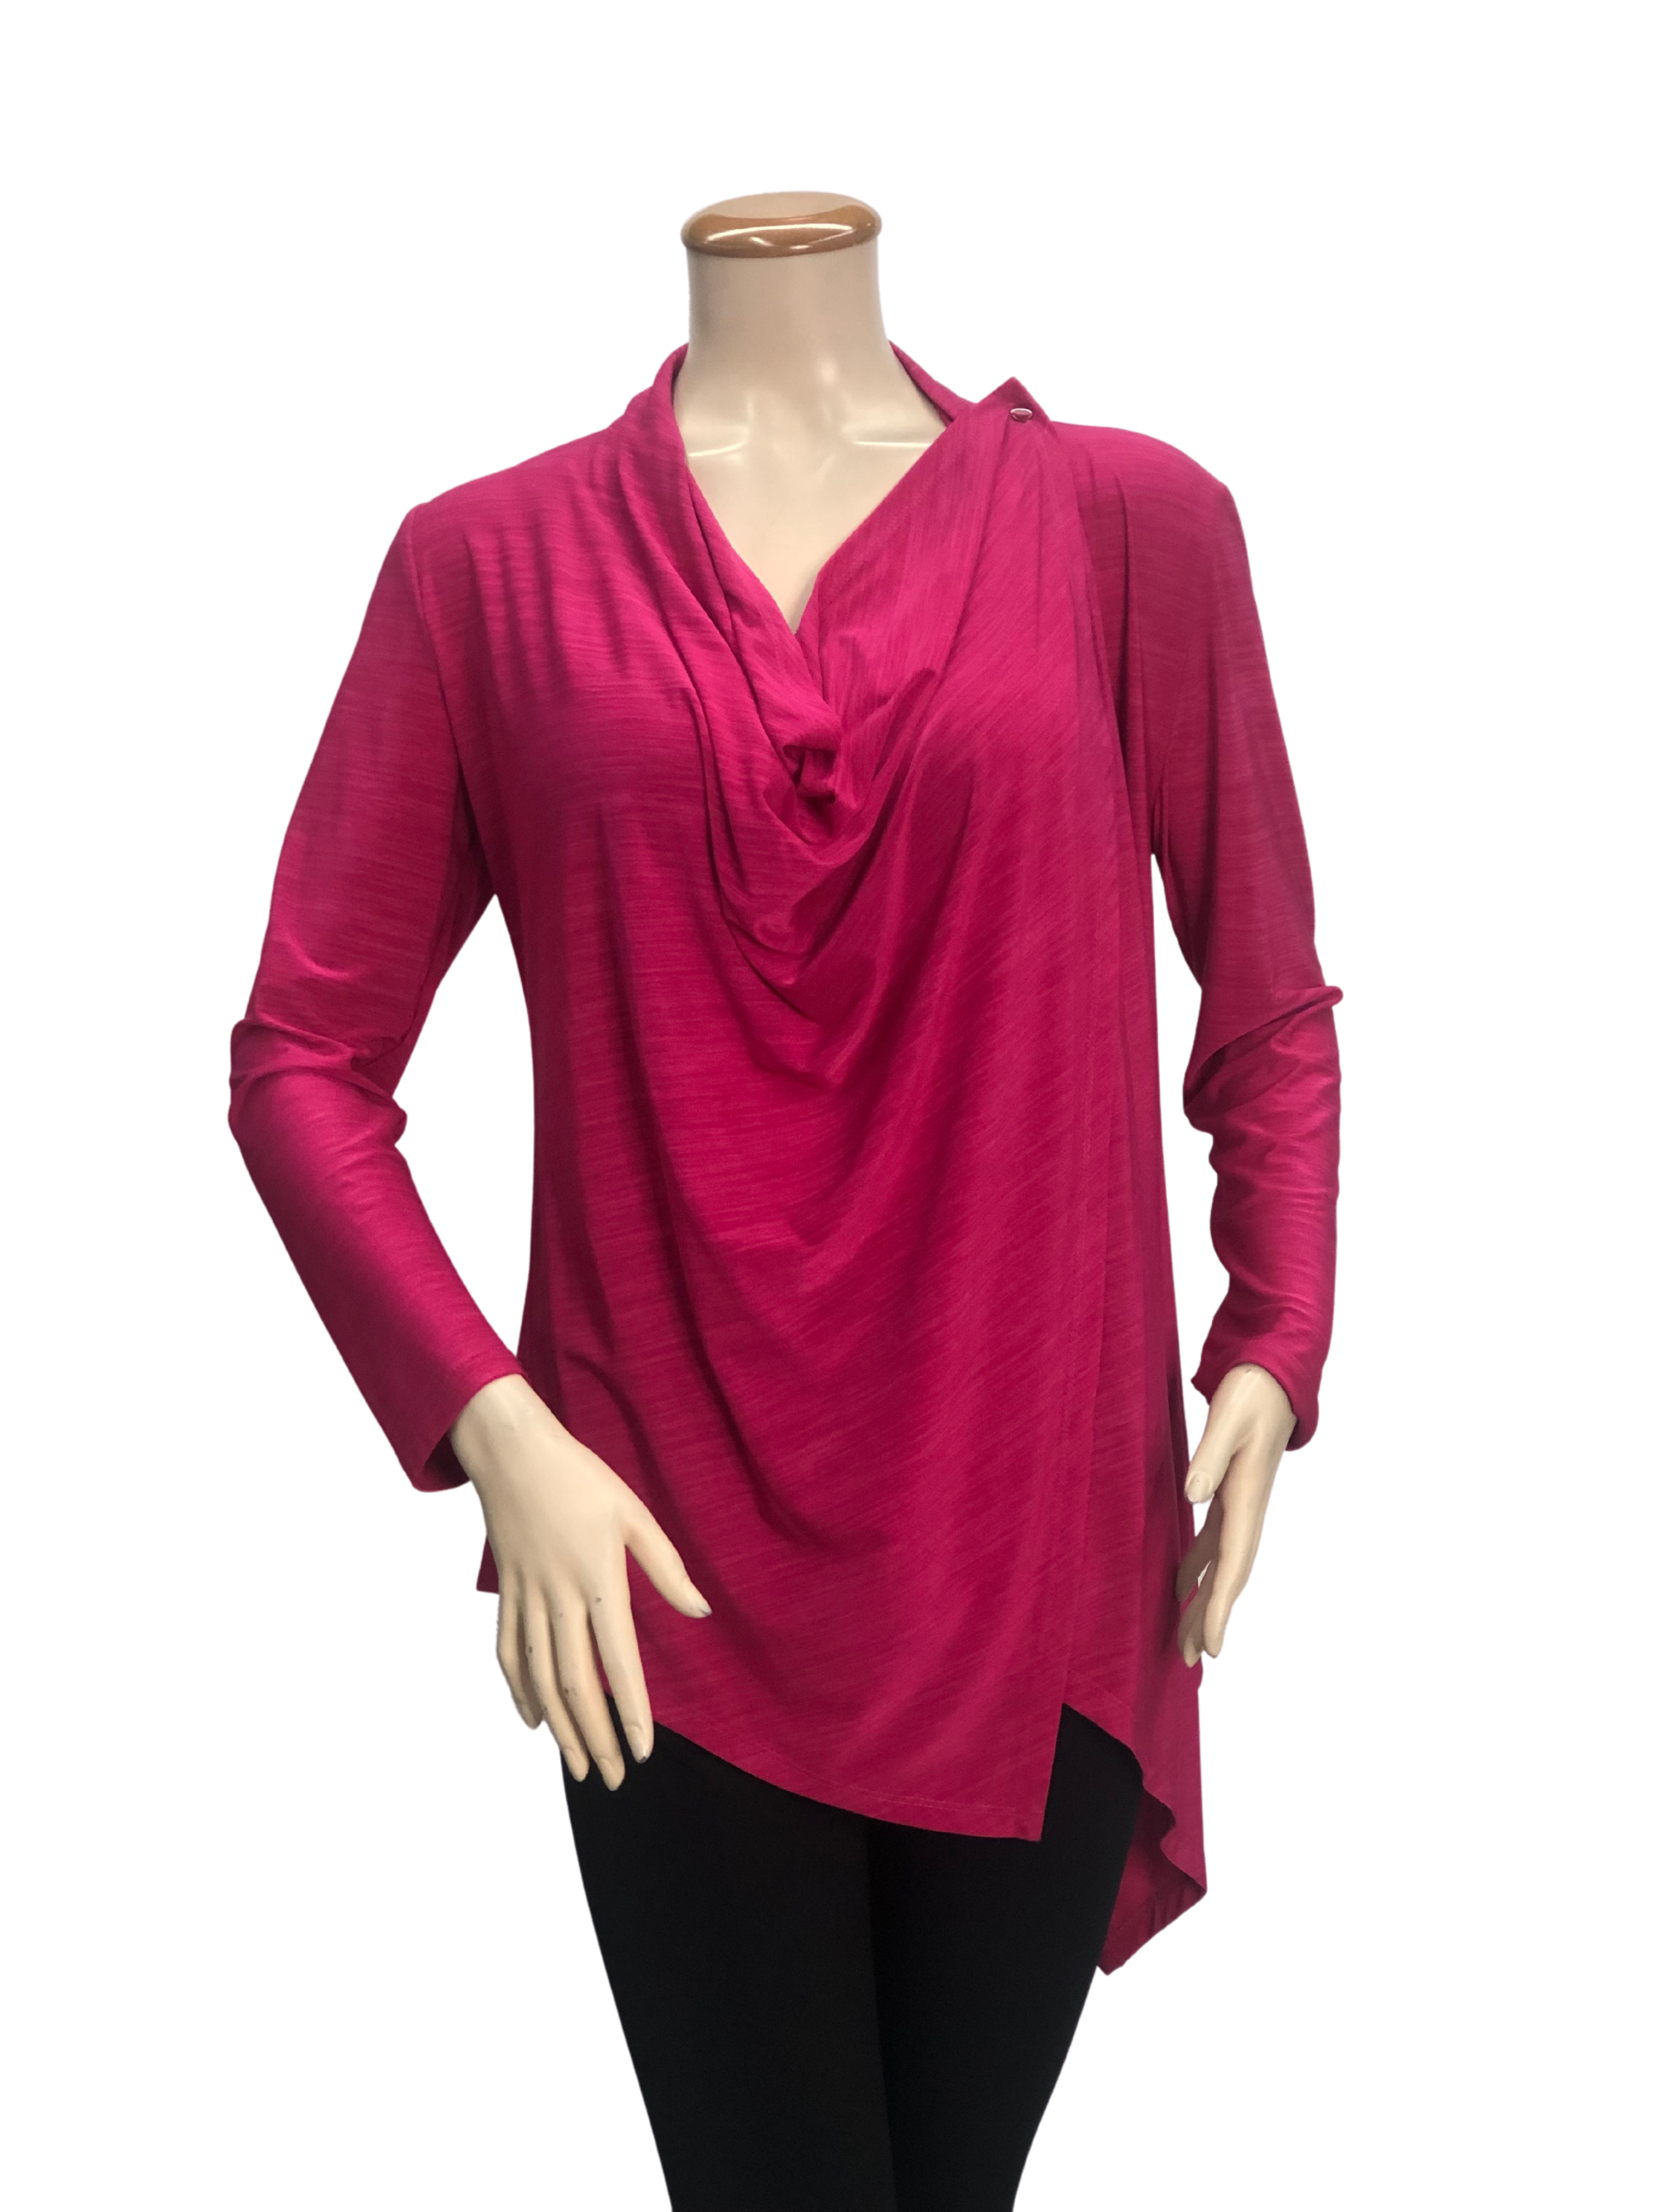 Multi way Top Style, convertible top - T315 SALE